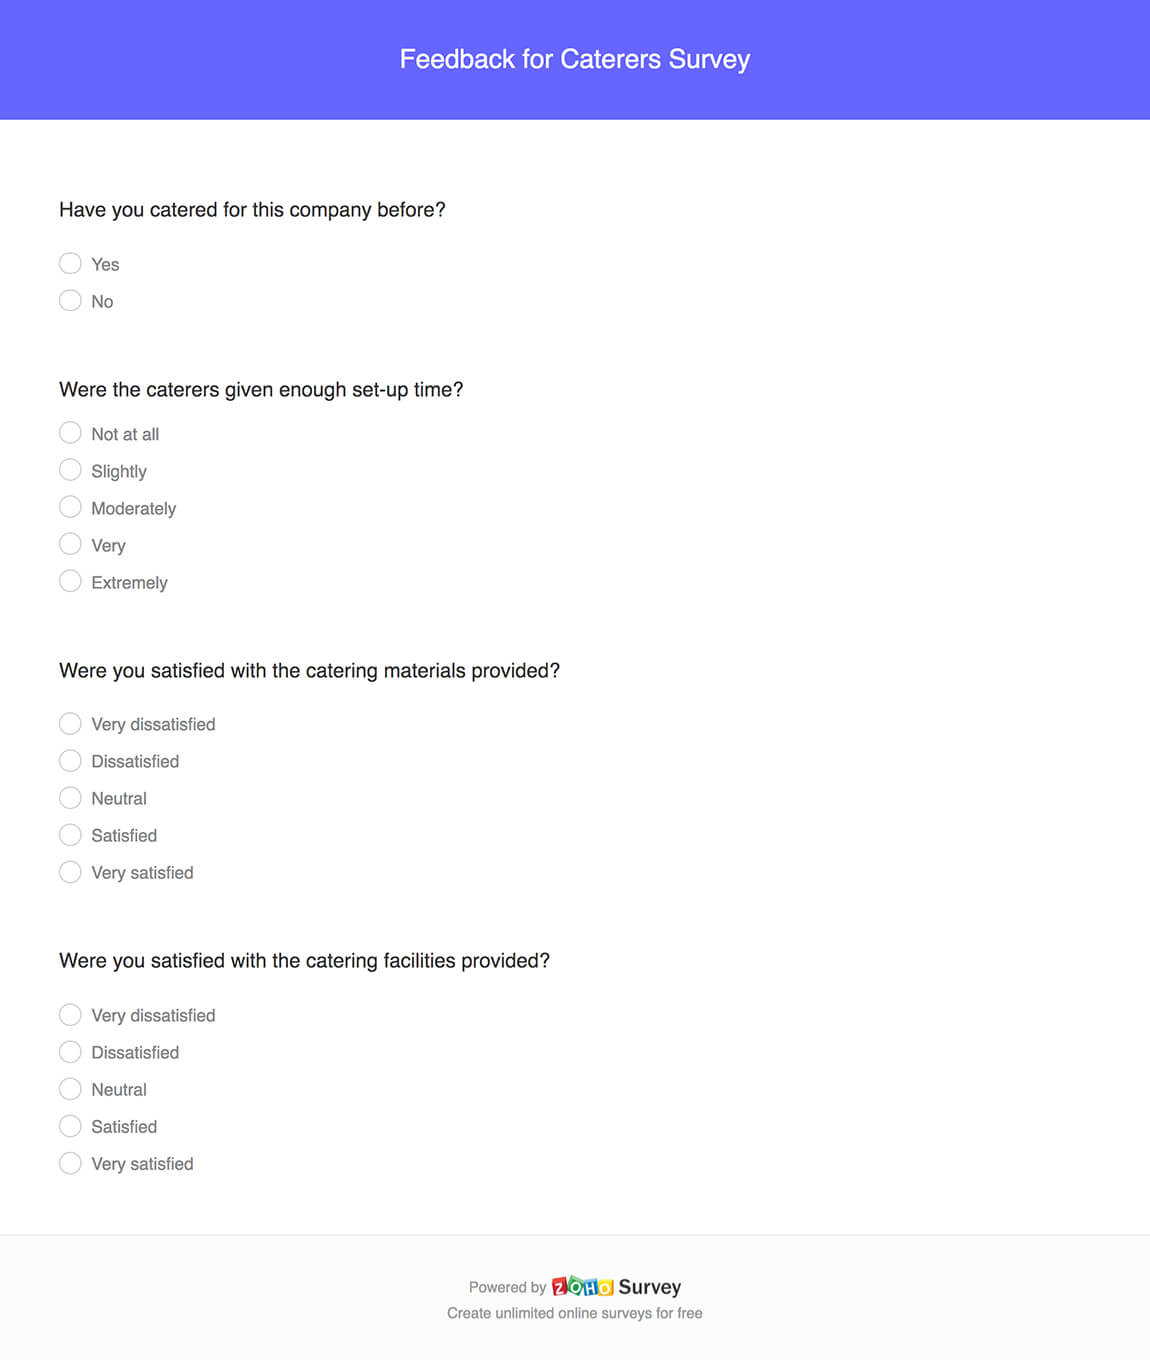 Feedback for caterers survey questionnaire template